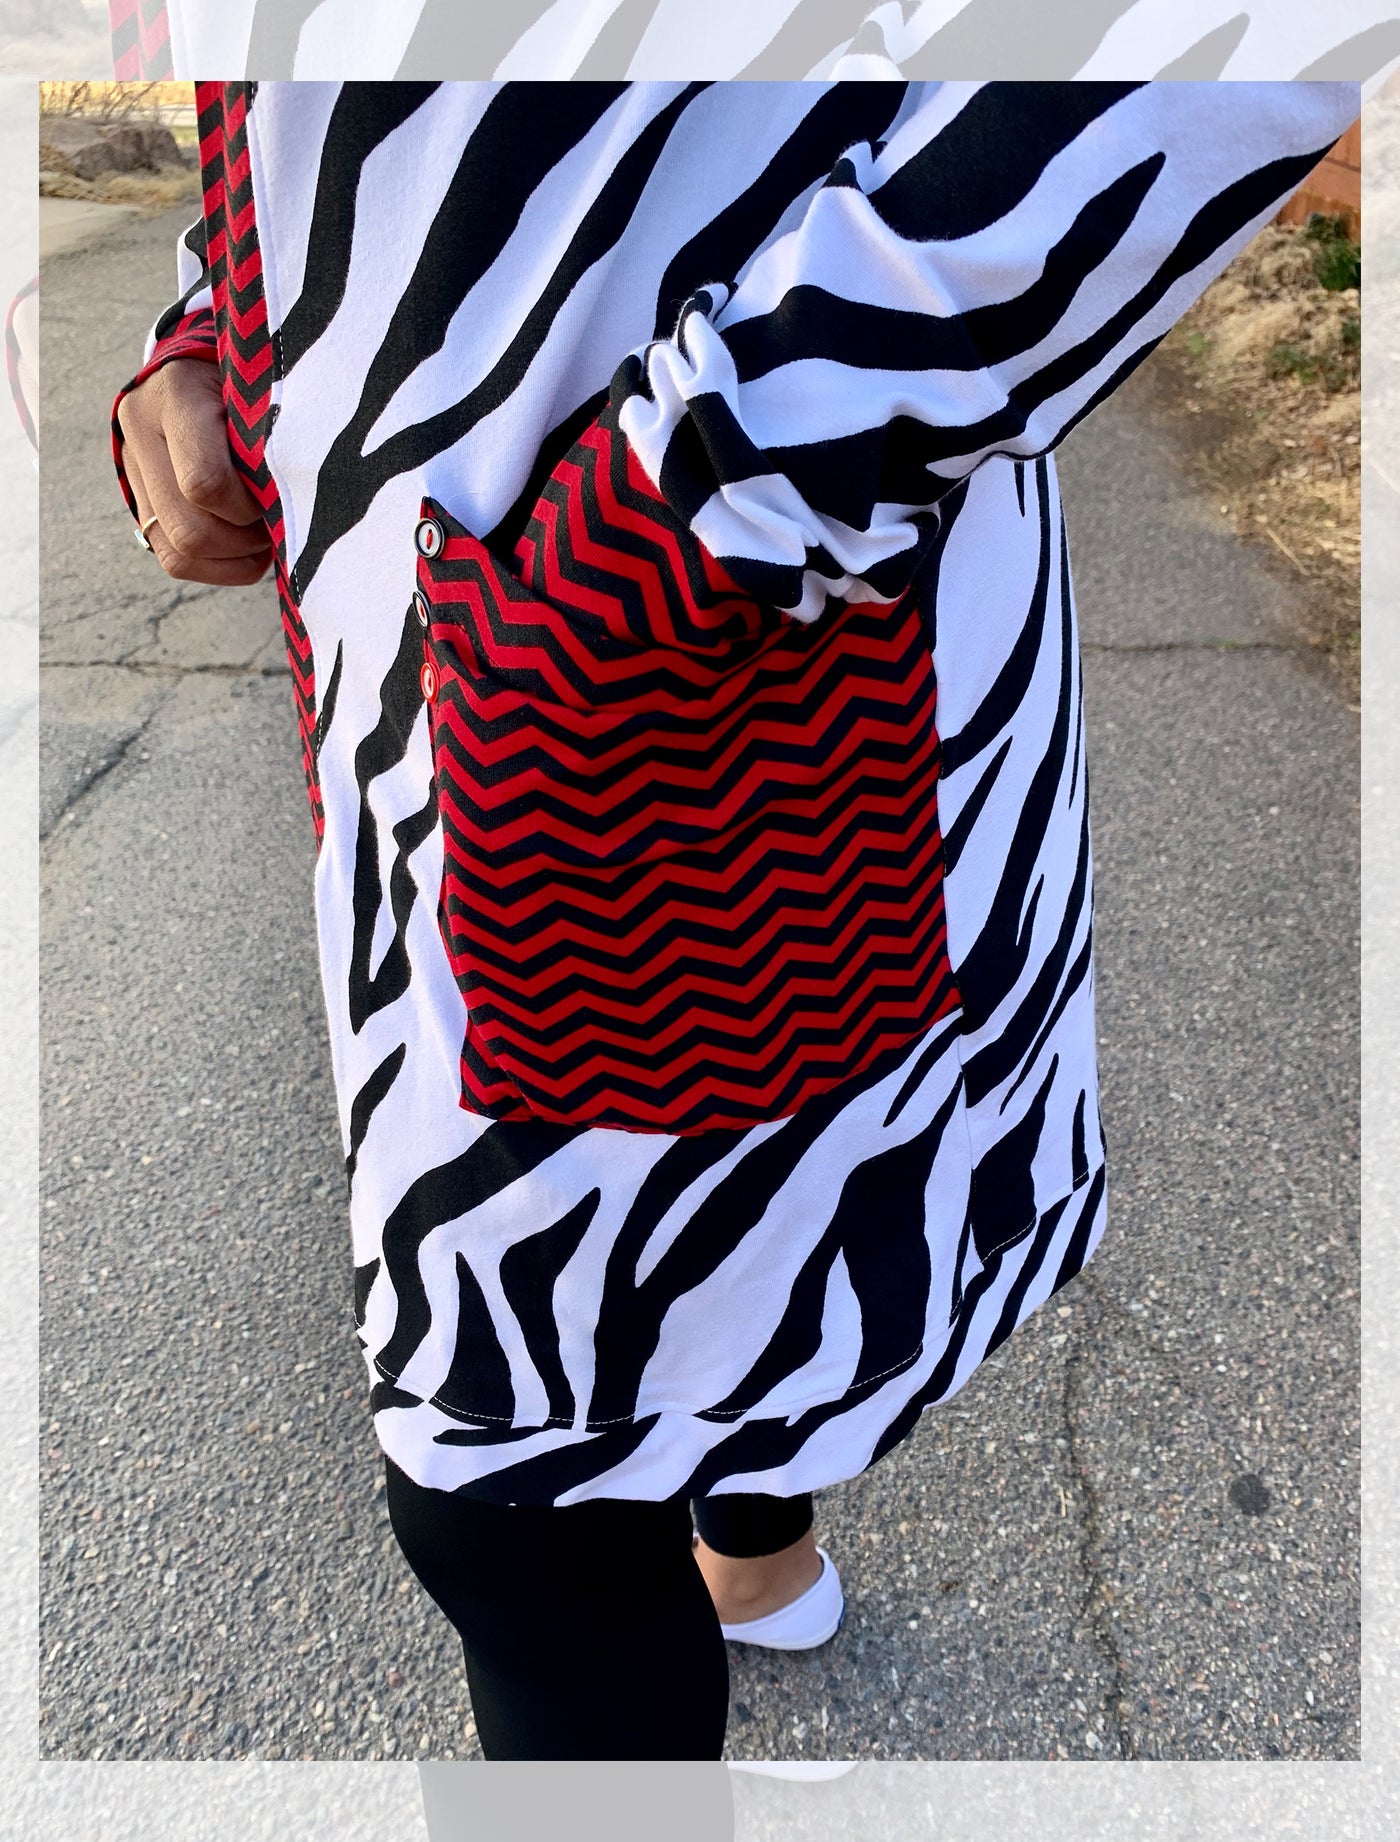 Sale! Zebra Print Cardigan with Red Accents